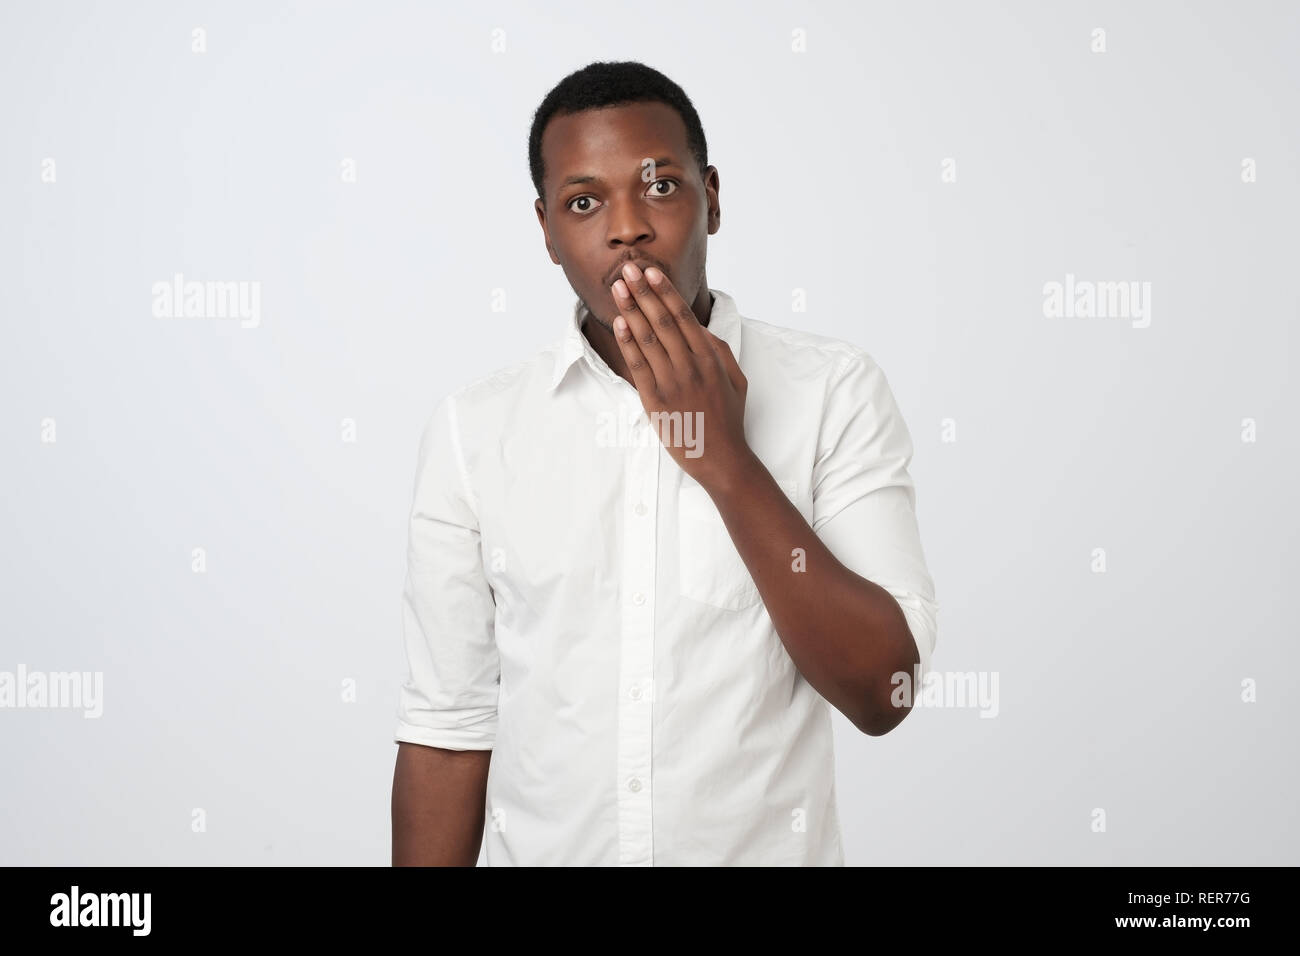 Shocked young african man in formal wear covering mouth with hand. Stock Photo